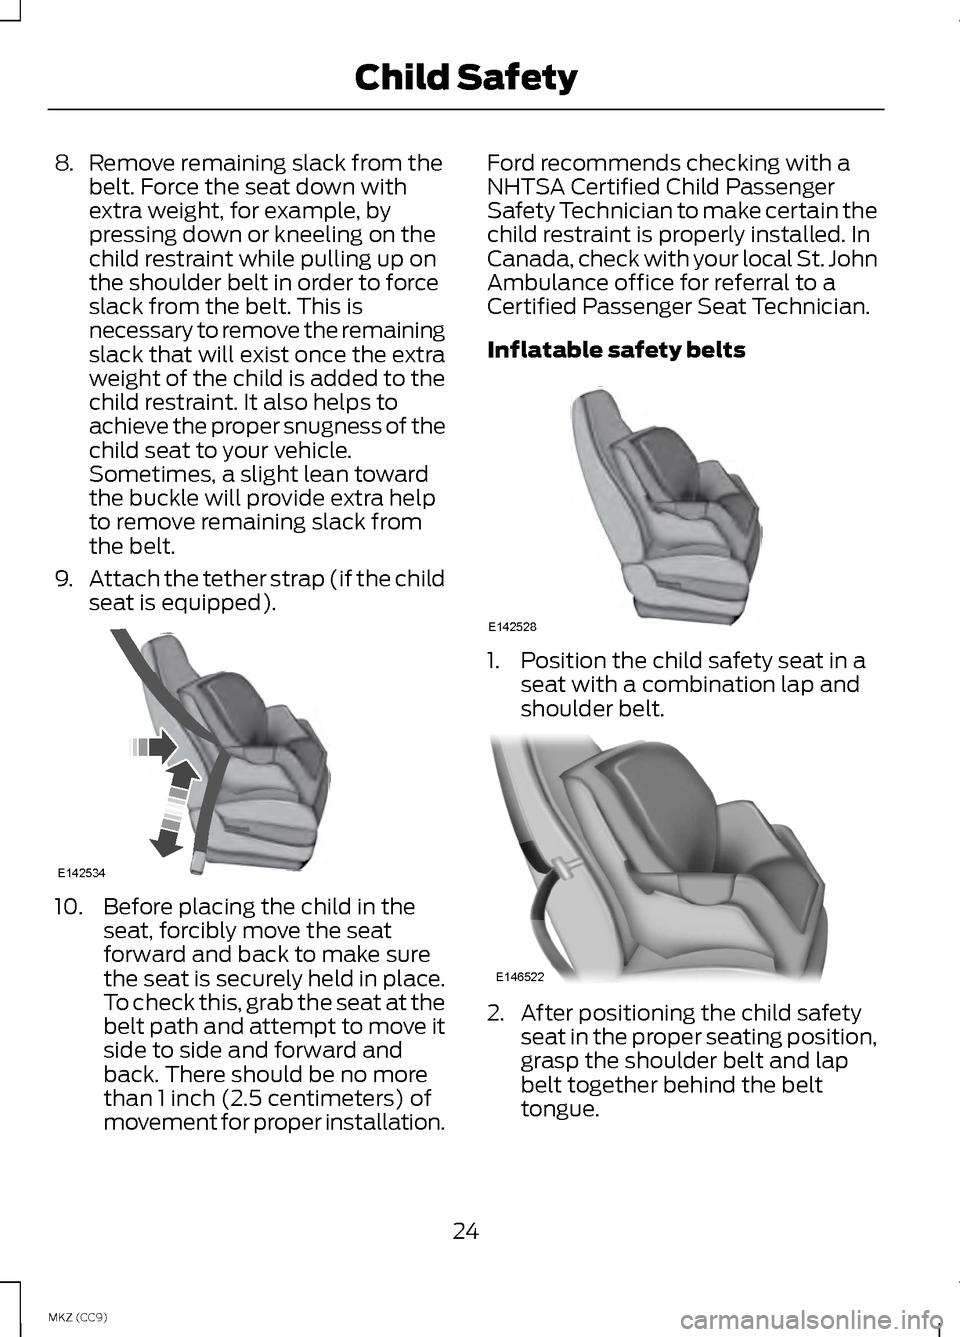 LINCOLN MKZ HYBRID 2013  Owners Manual 8.
Remove remaining slack from the
belt. Force the seat down with
extra weight, for example, by
pressing down or kneeling on the
child restraint while pulling up on
the shoulder belt in order to force